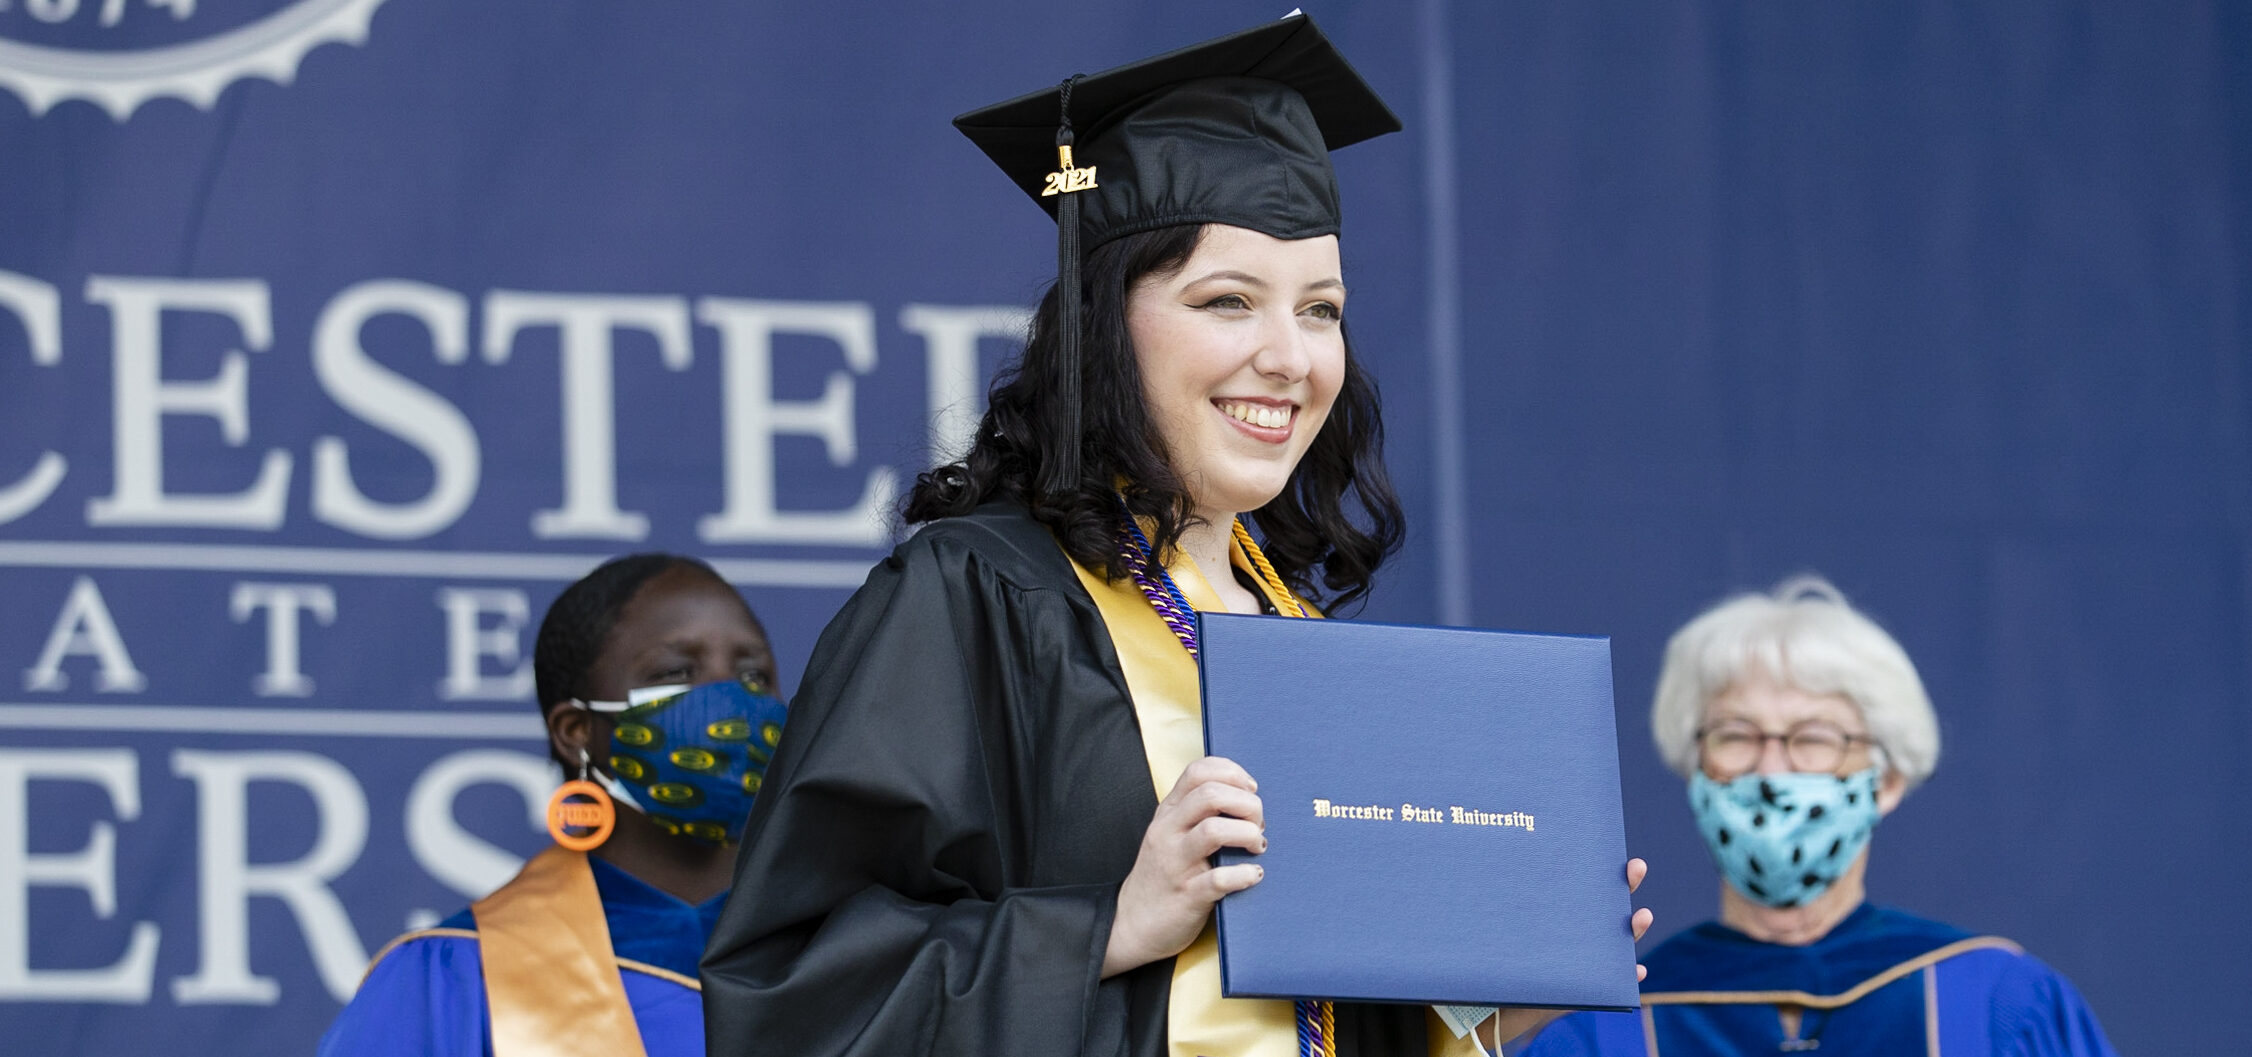 A student at the Worcester State University Graduation Ceremony showing off her diploma on stage